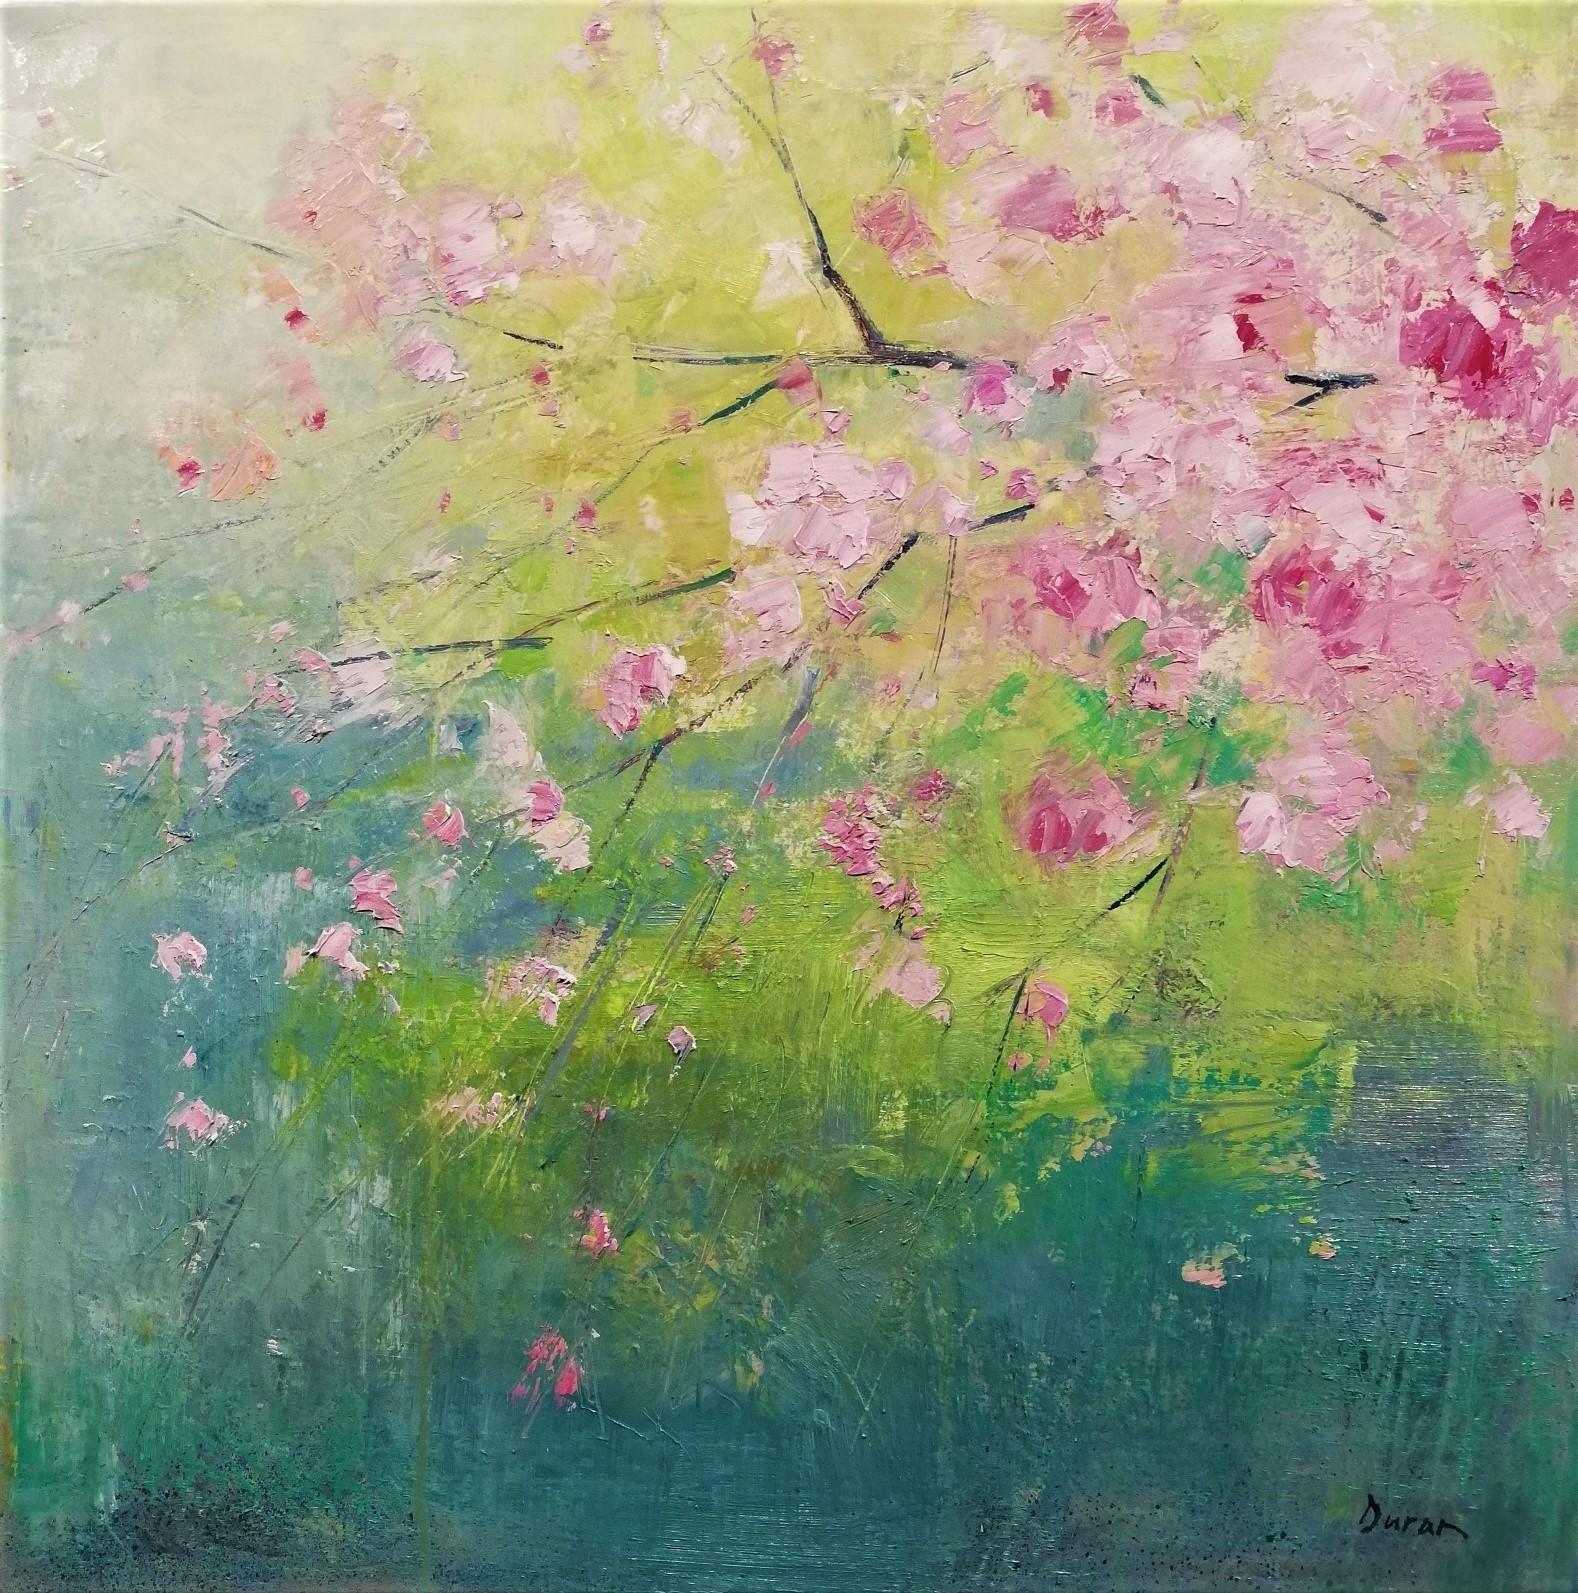 Marta Duran Landscape Painting - "Spring Emotion II" 60x60cm oil on canvas cherry blossoms spring flowers hope 